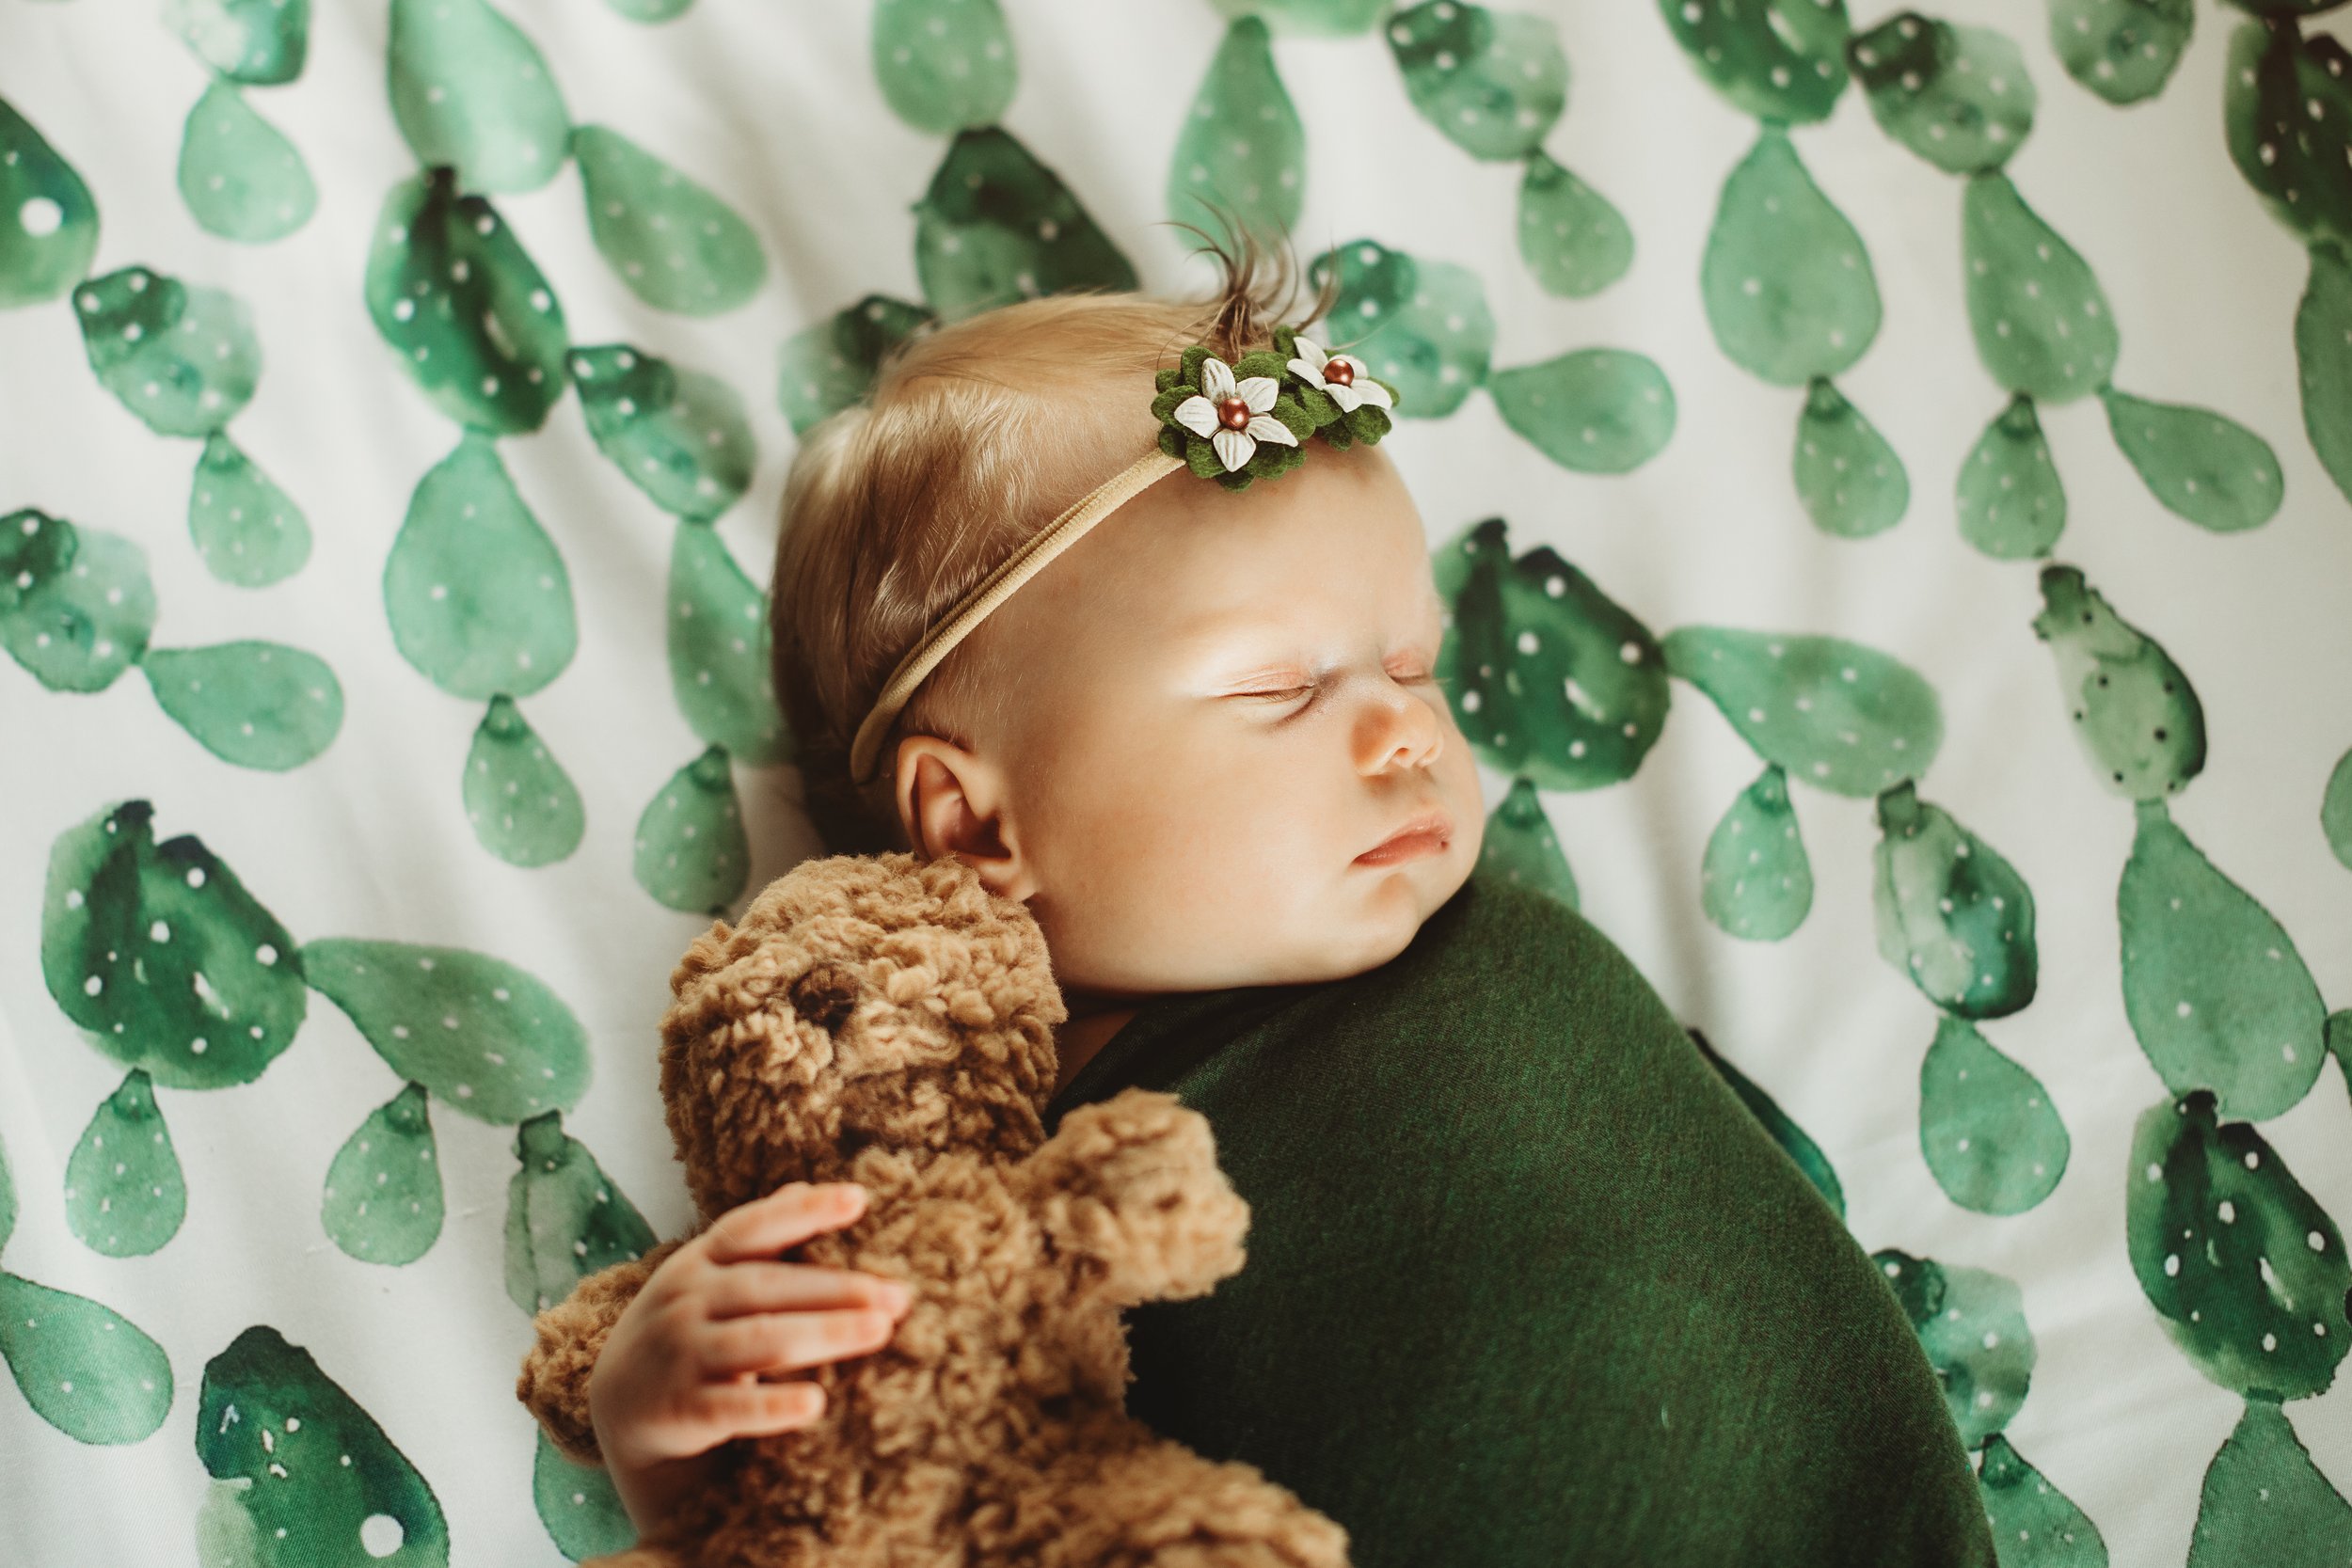  Newborn baby snuggles her teddy bear at her newborn photo shoot. cactus sheets floral headband brown fuzzy teddy bear photos at home Teala Ward Photography in Princeton Illinois #TealaWardPhotography #illinoisphotographer #princetonillinois  